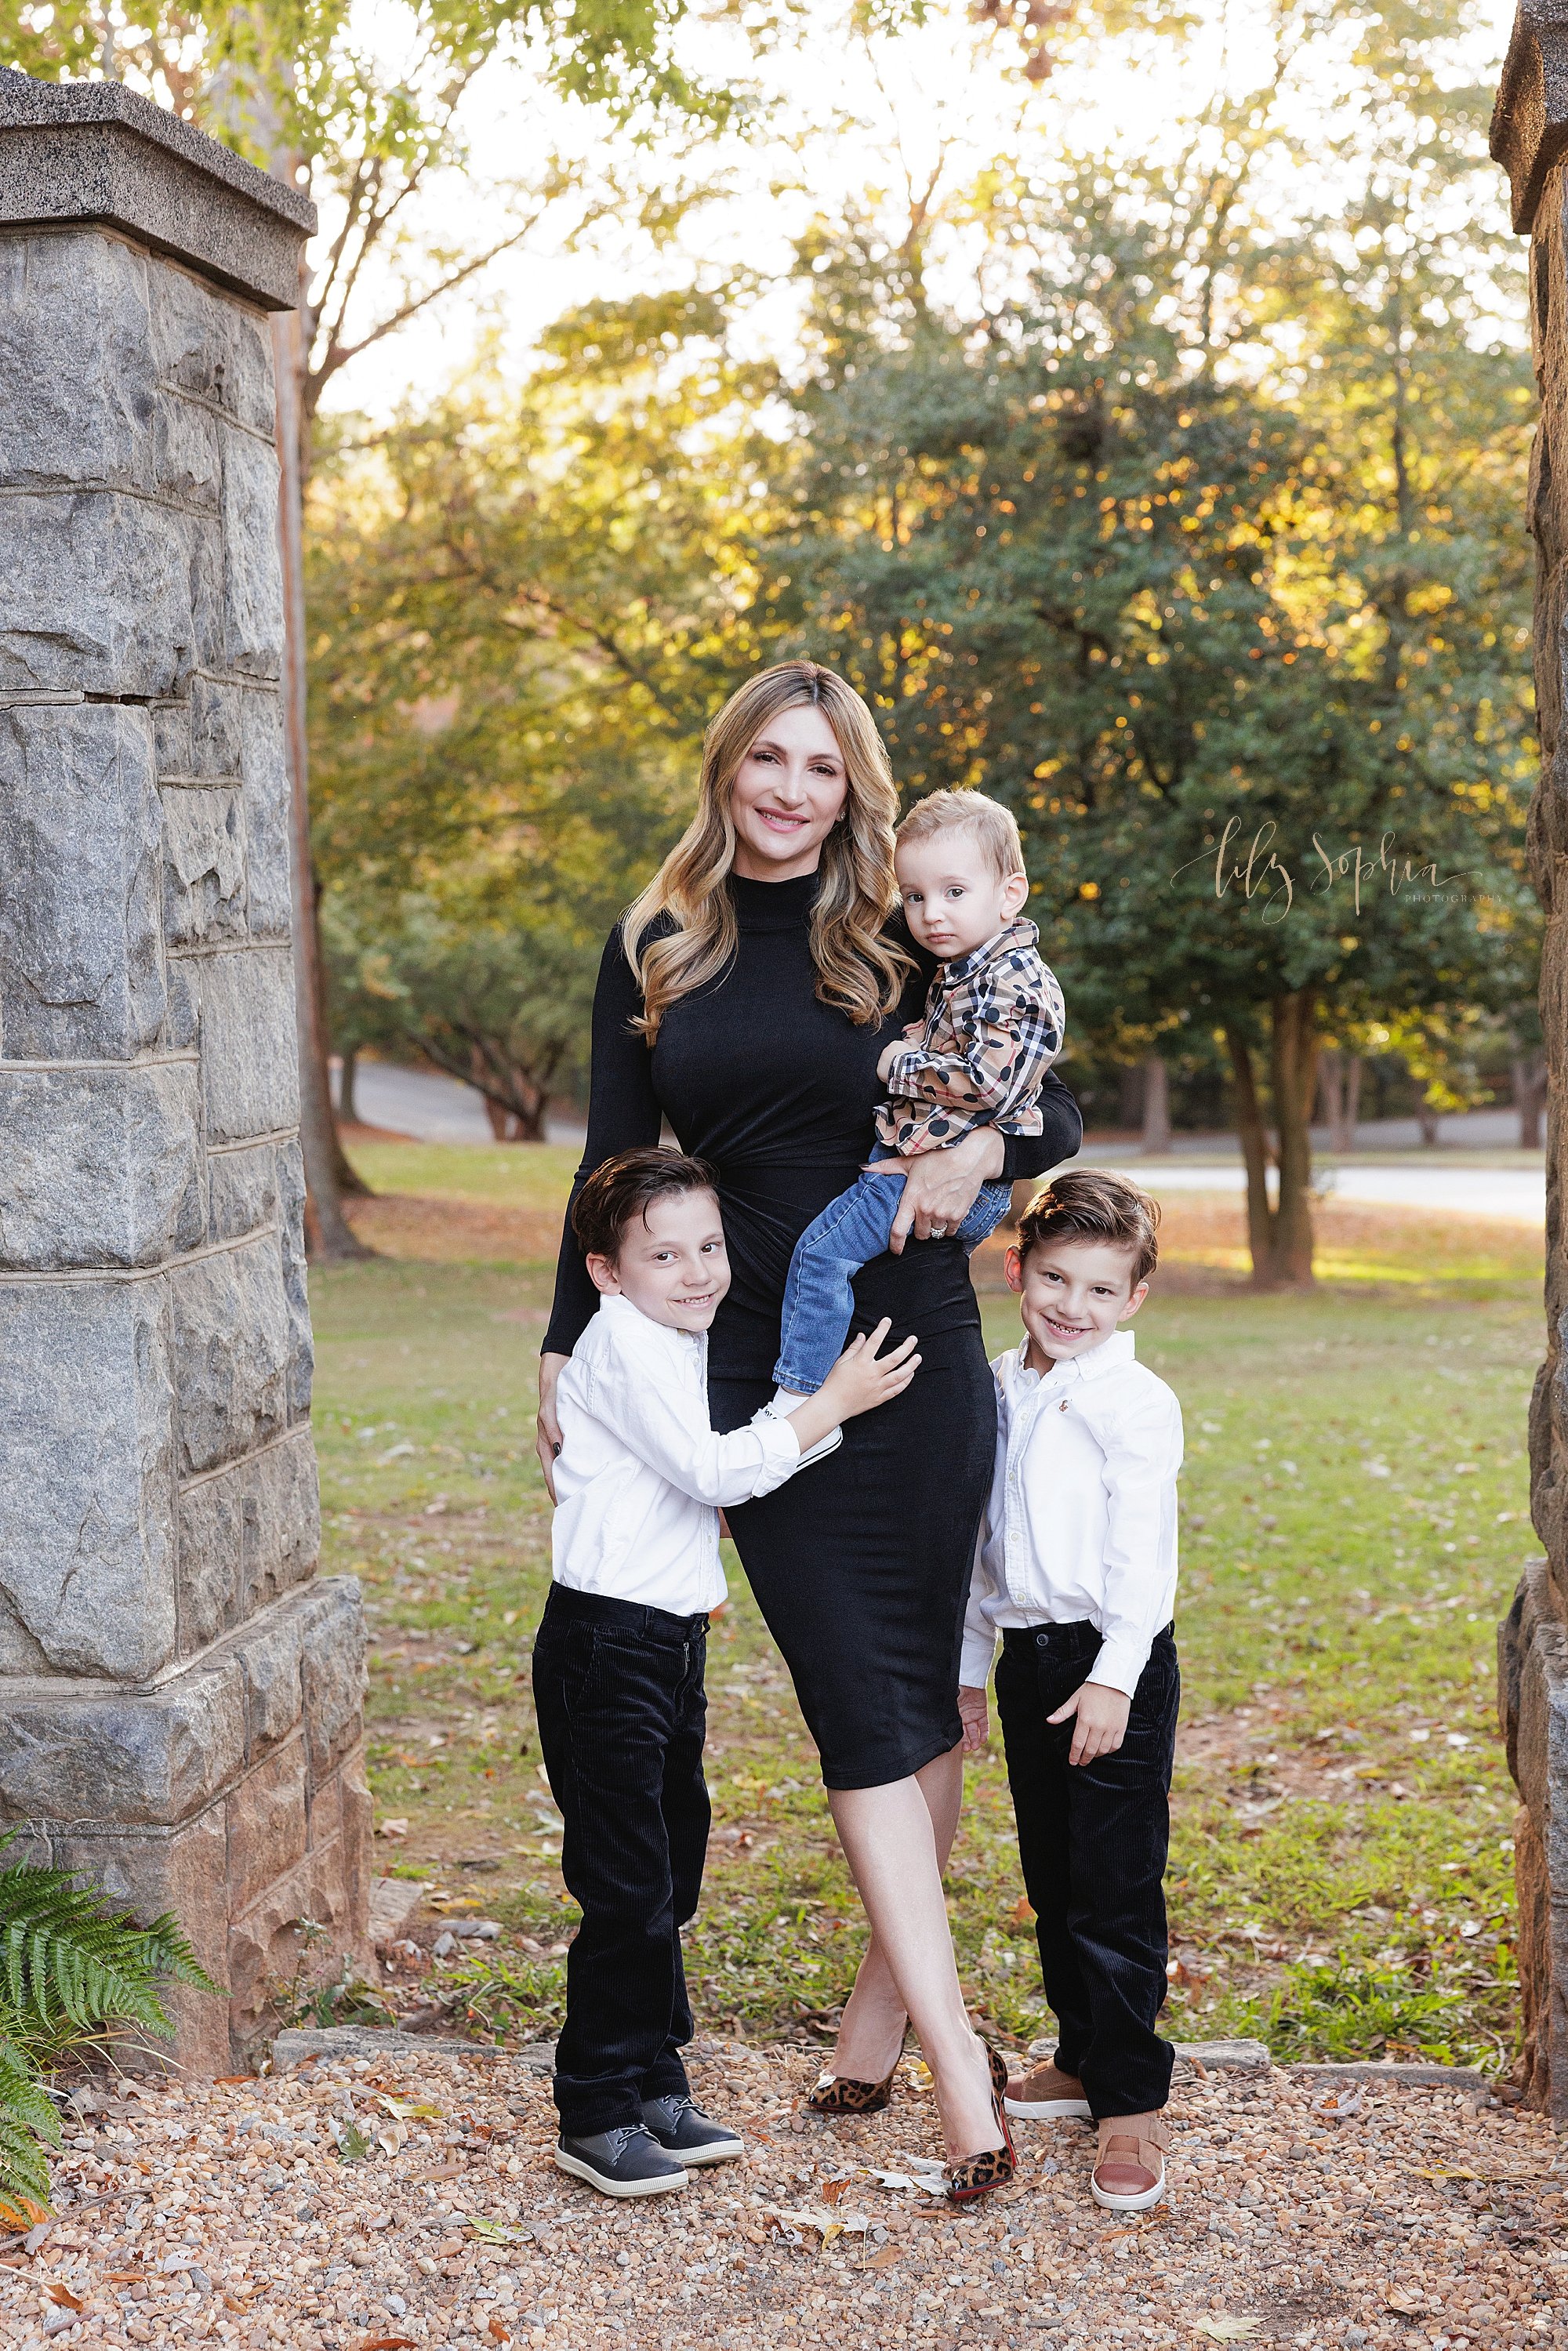  A mother stands in a stone entranceway of an Atlanta park holding her youngest son in her arms as her other two sons flank her taken for a mommy and me photo session during the fall season at sunset. 